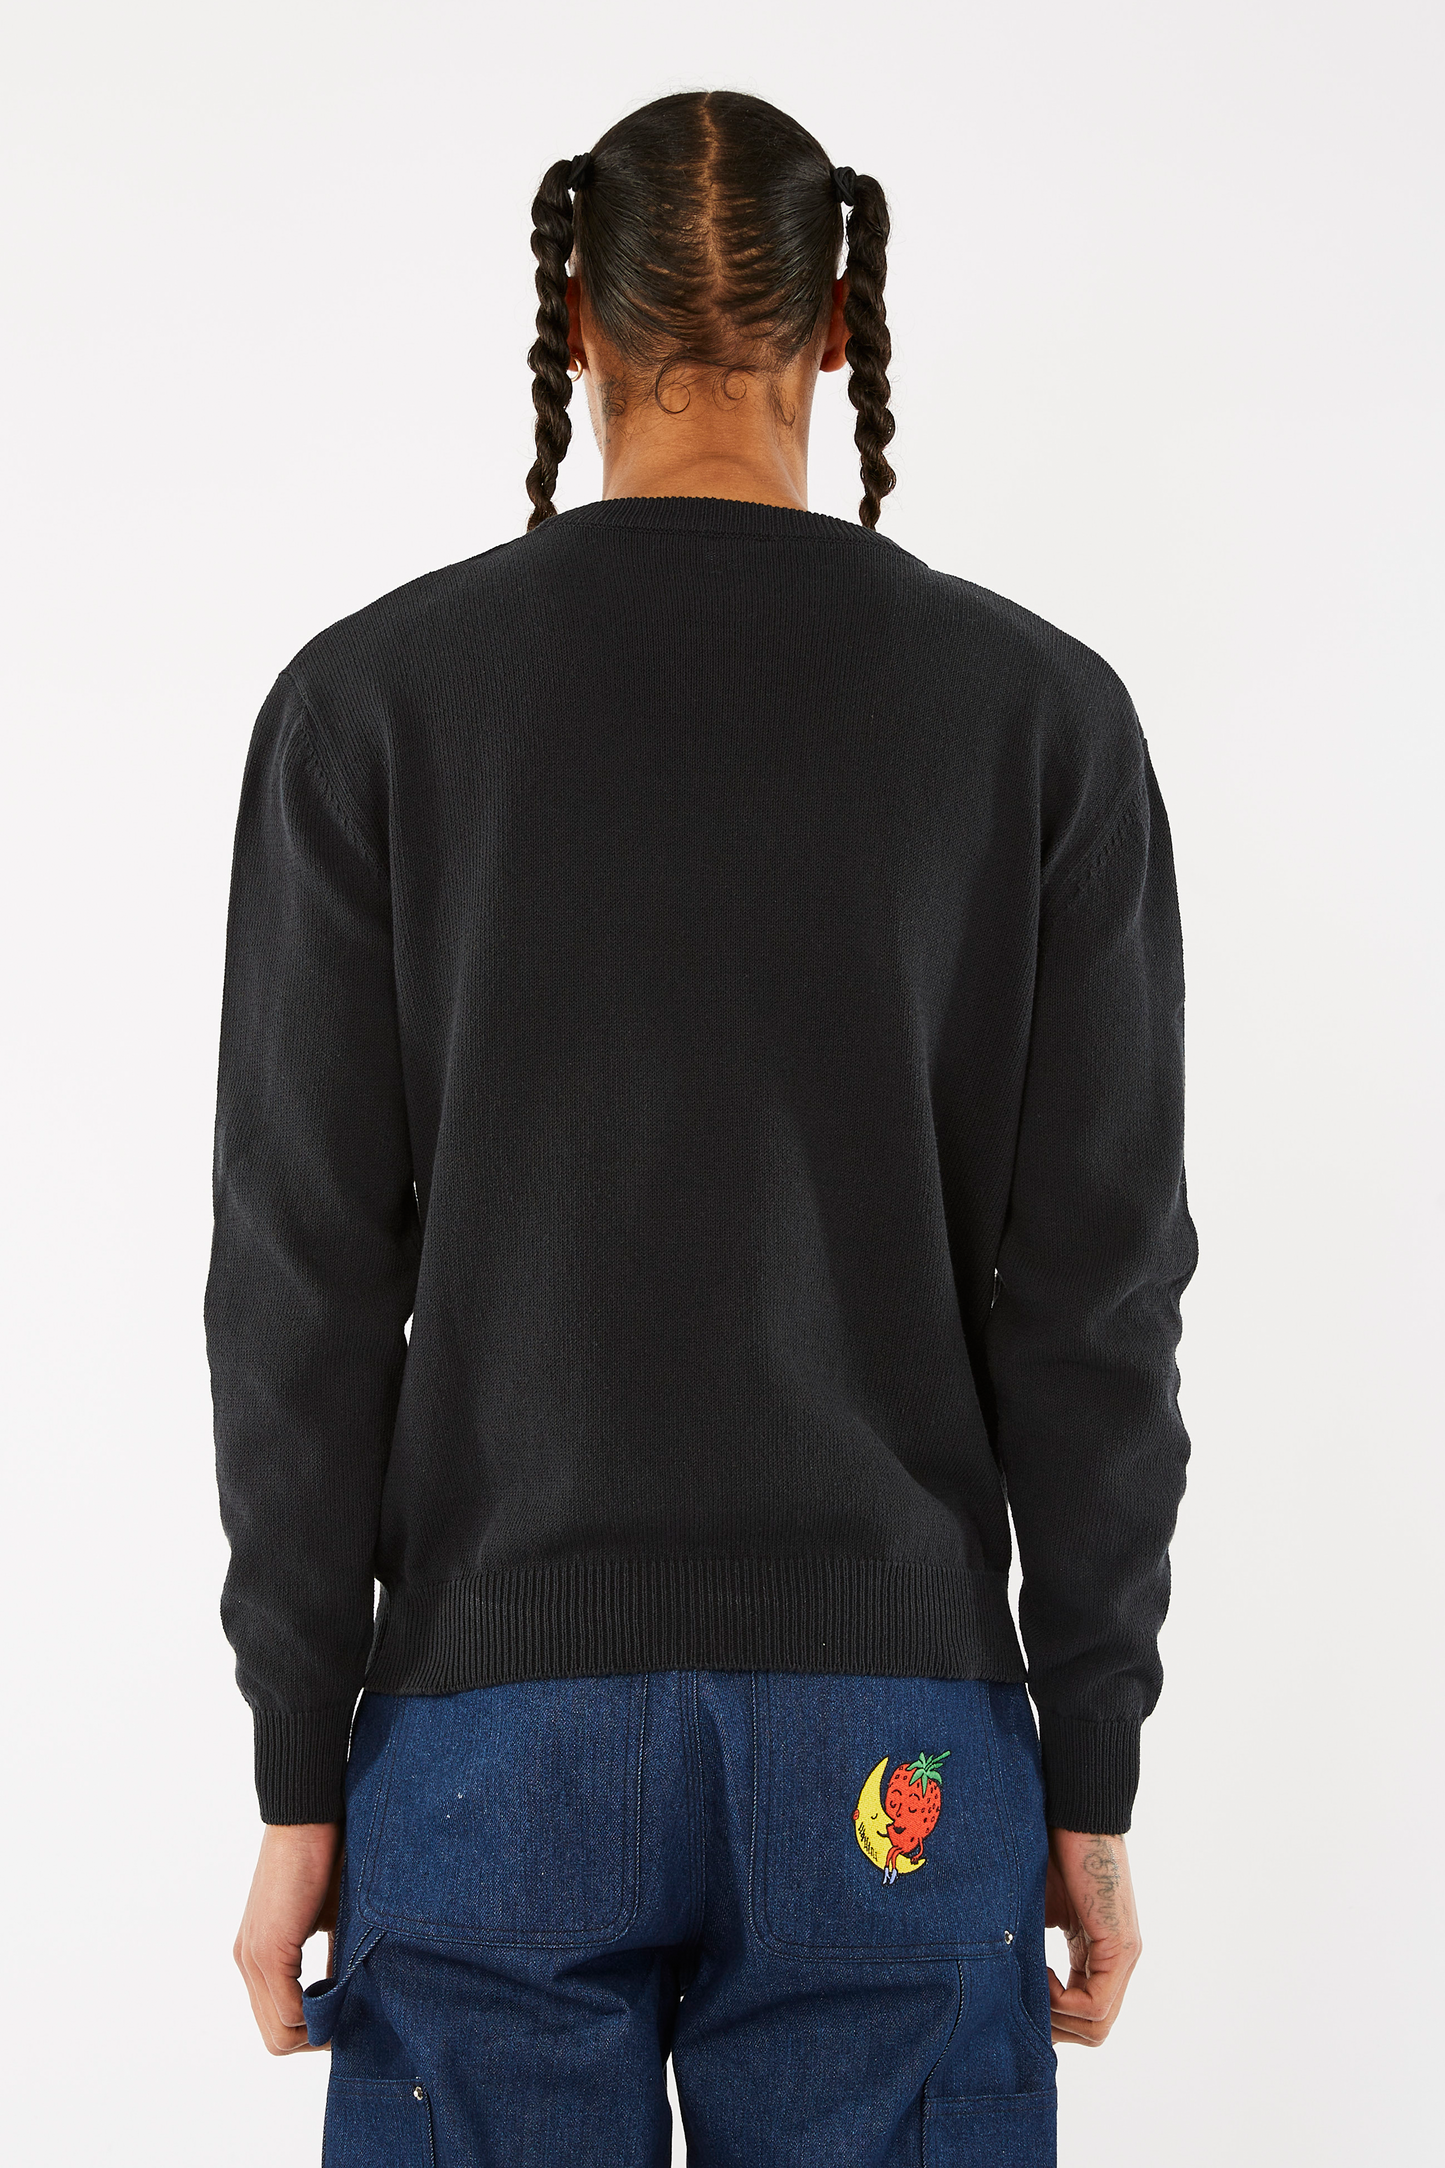 SUN AND EARTH SWEATER KNIT - BLACK